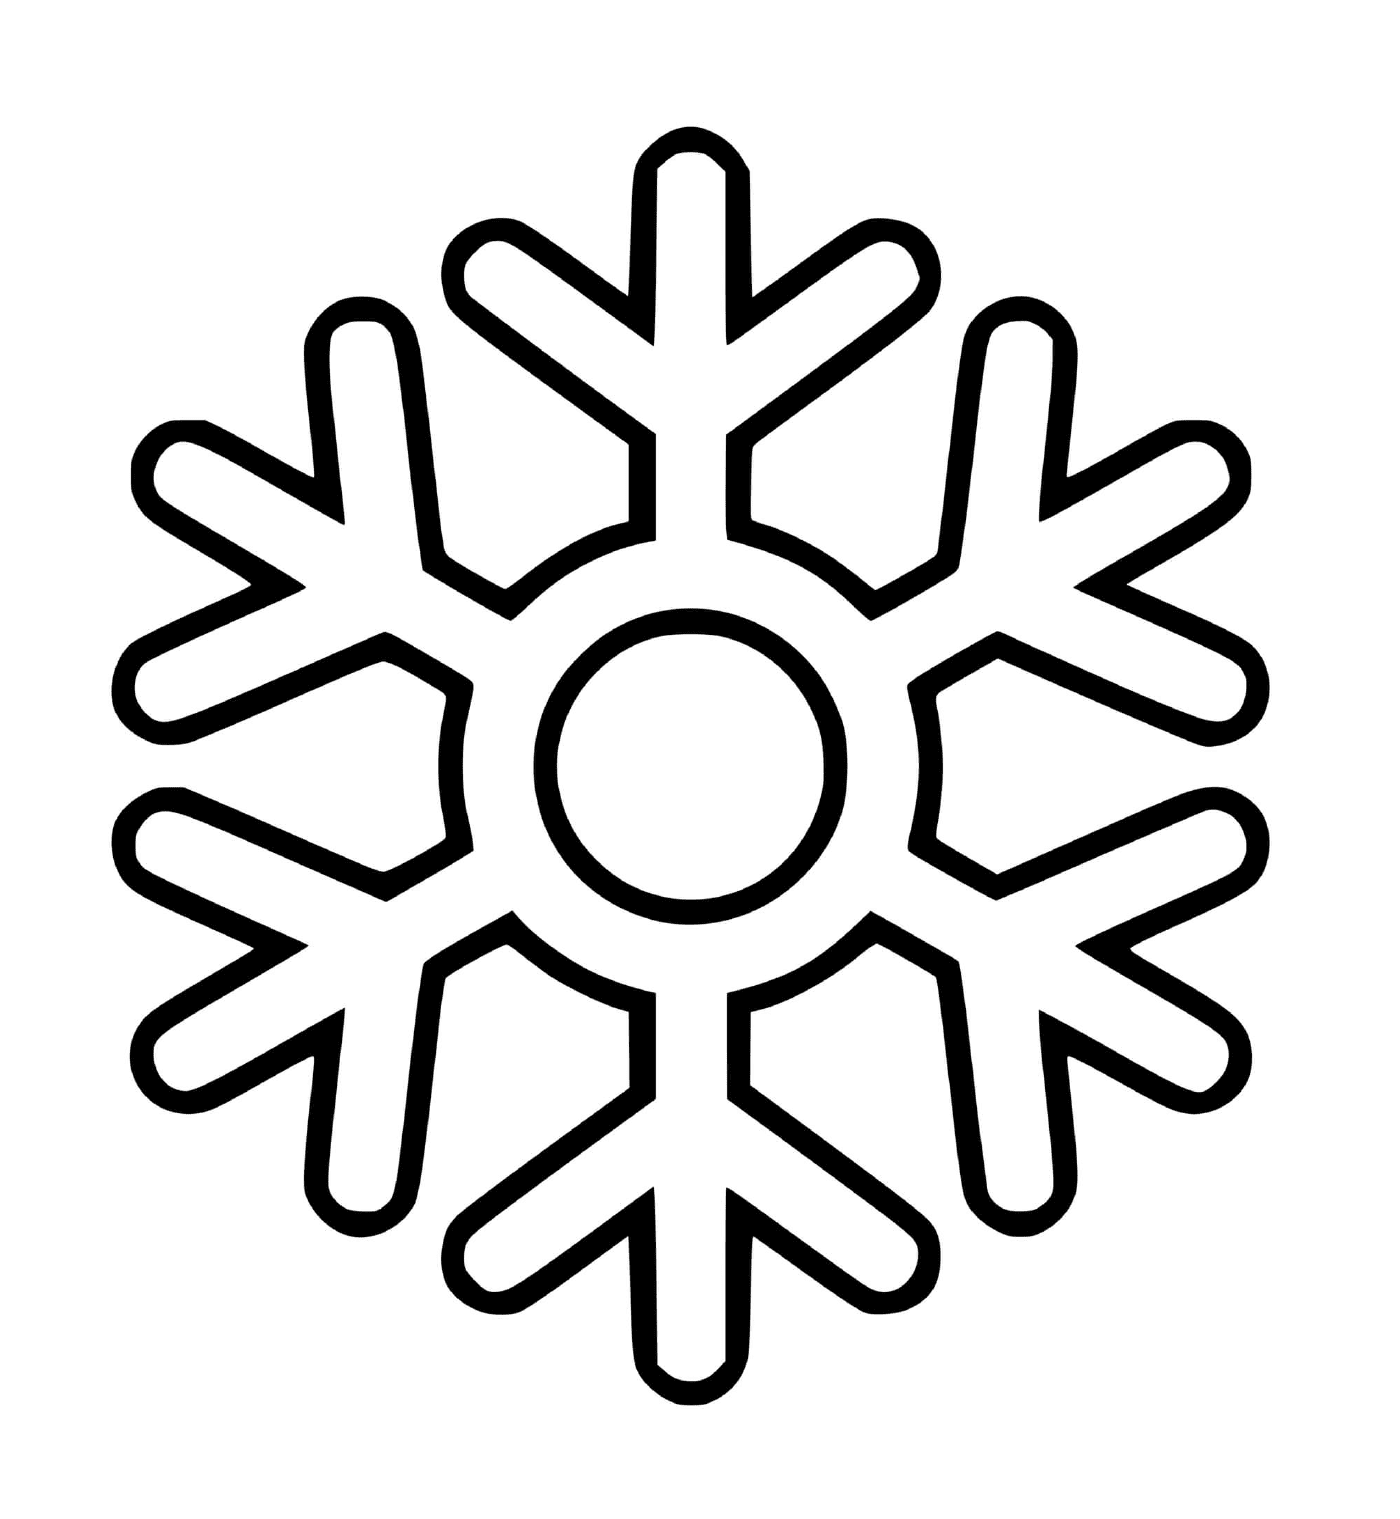  A snowflake with a simple circle 